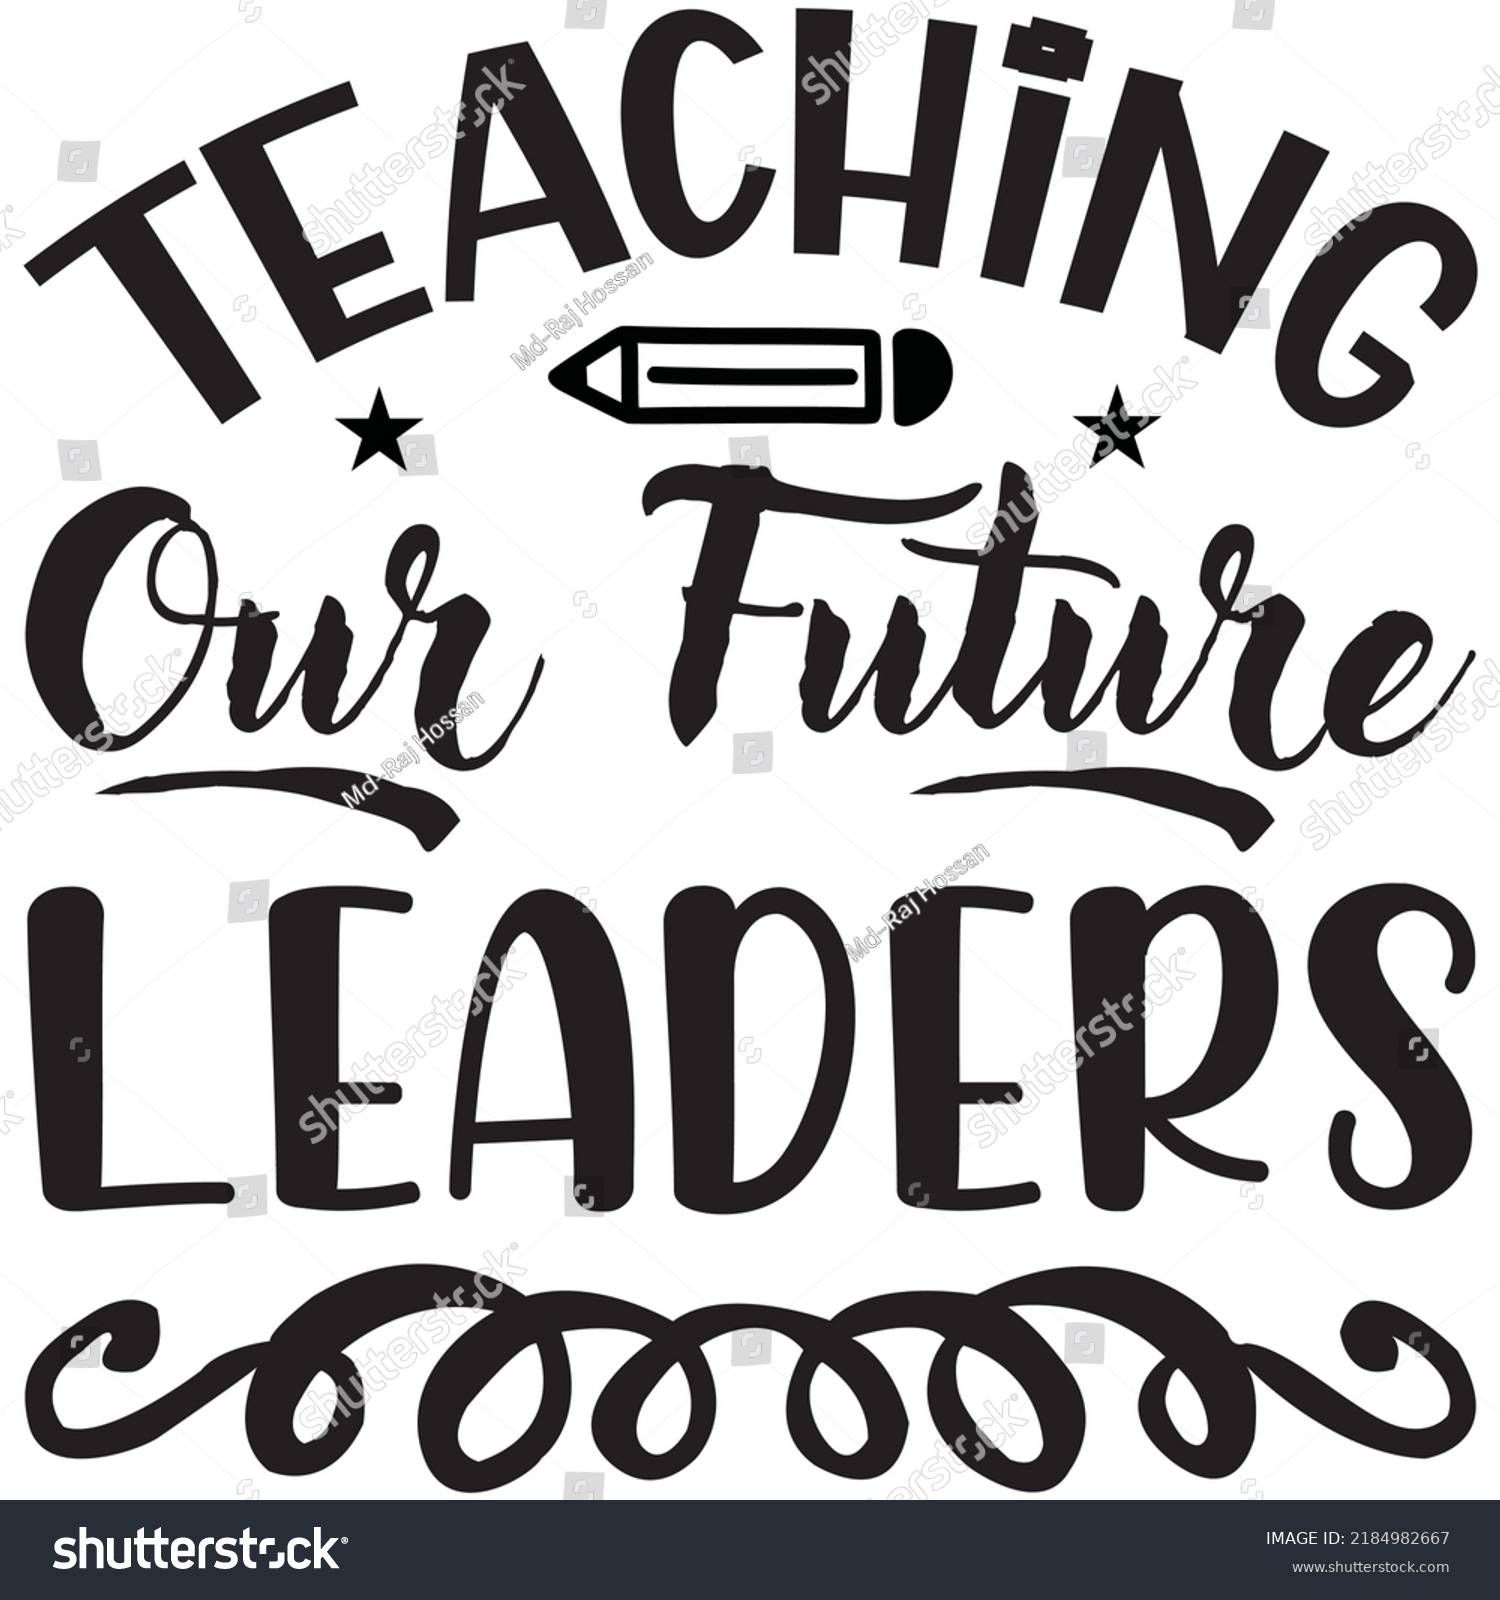 SVG of Teaching Our Future Leaders t-shirt design vector file. svg